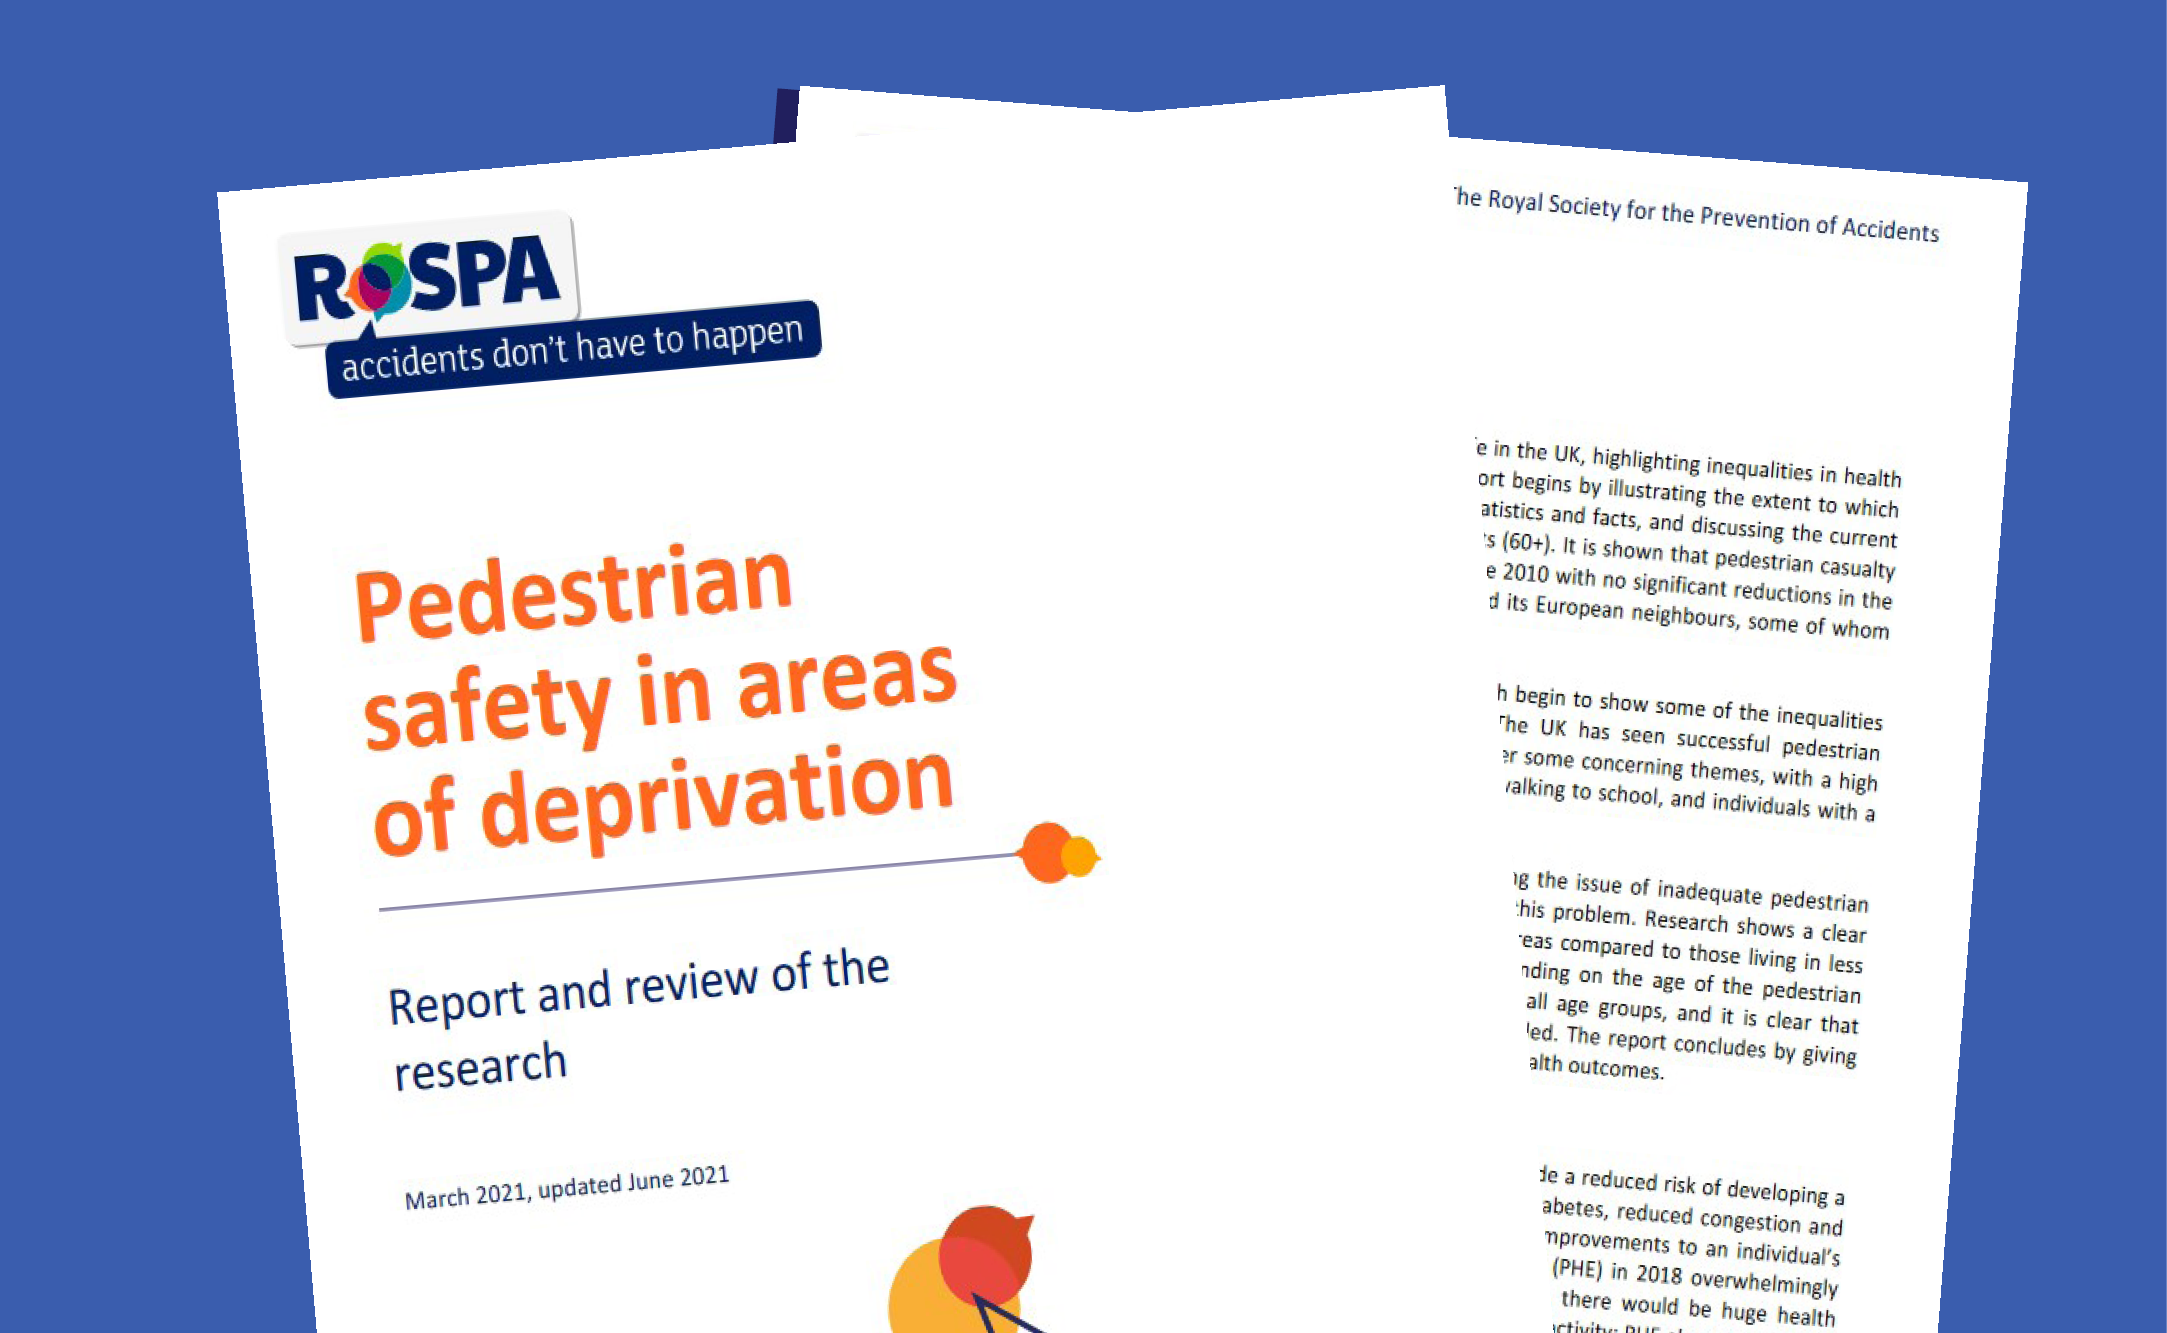 Pedestrian safety in areas of deprivation